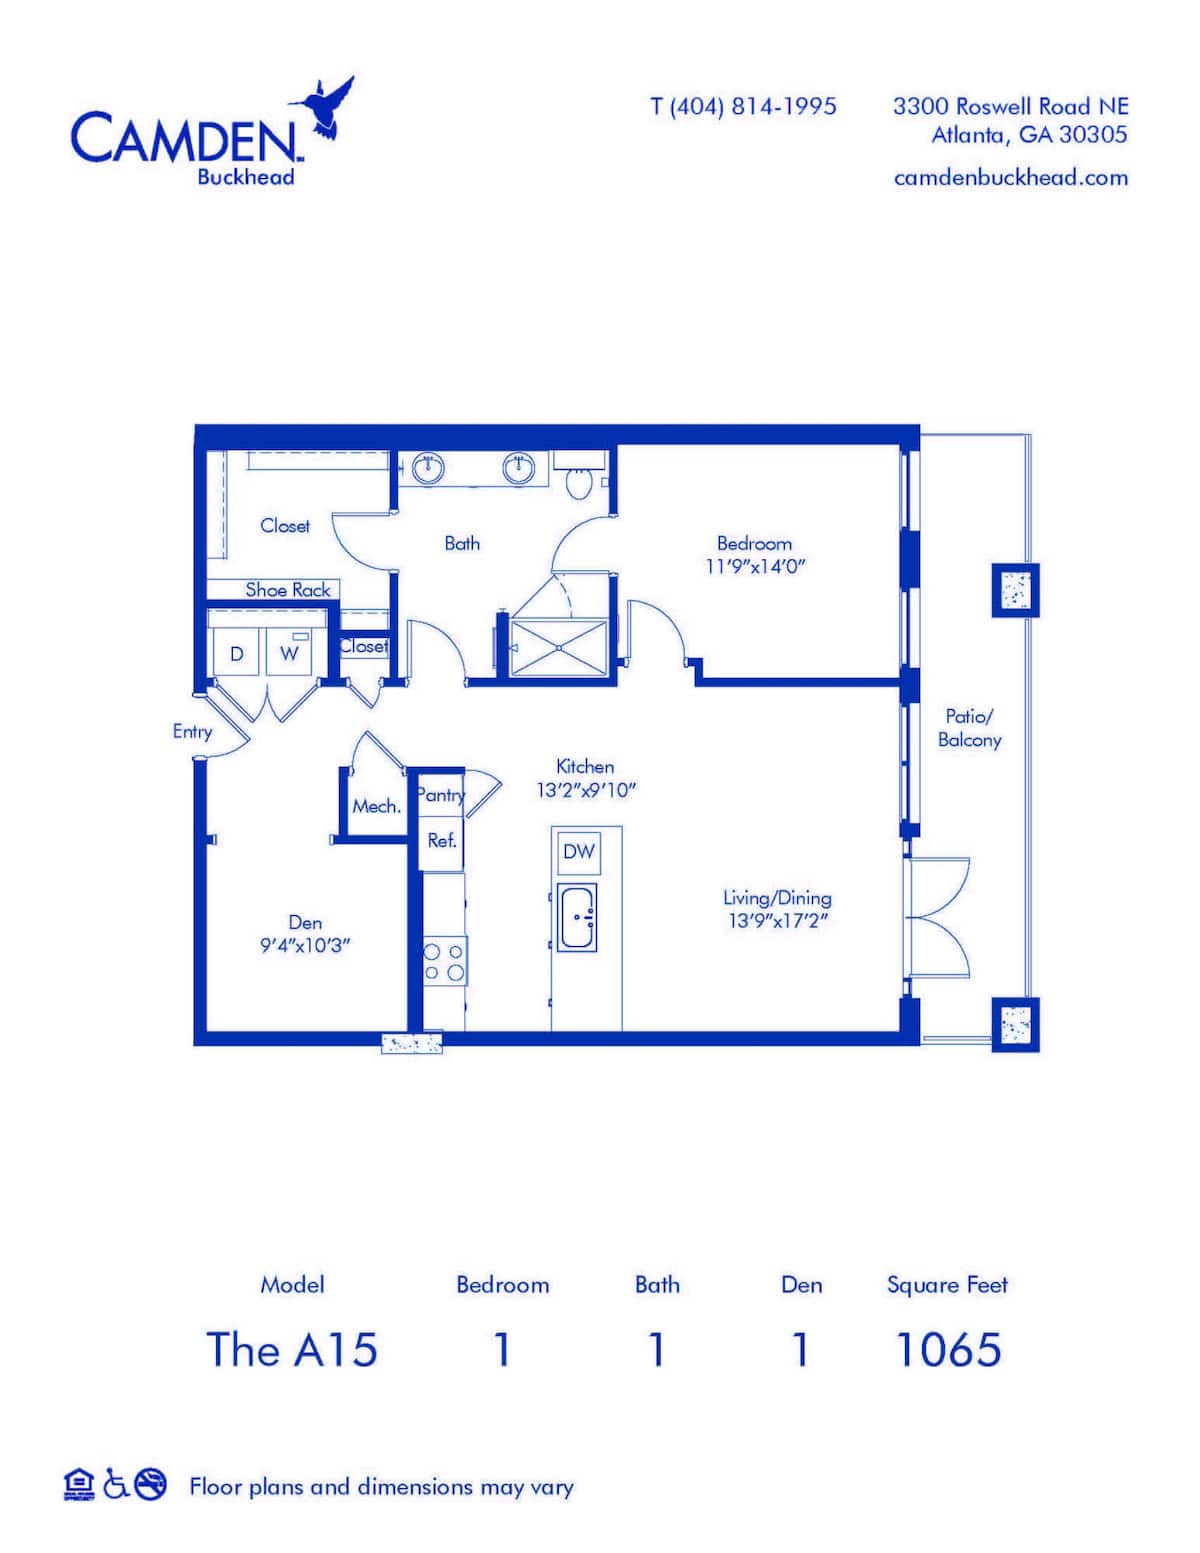 Floorplan diagram for The A15, showing 1 bedroom